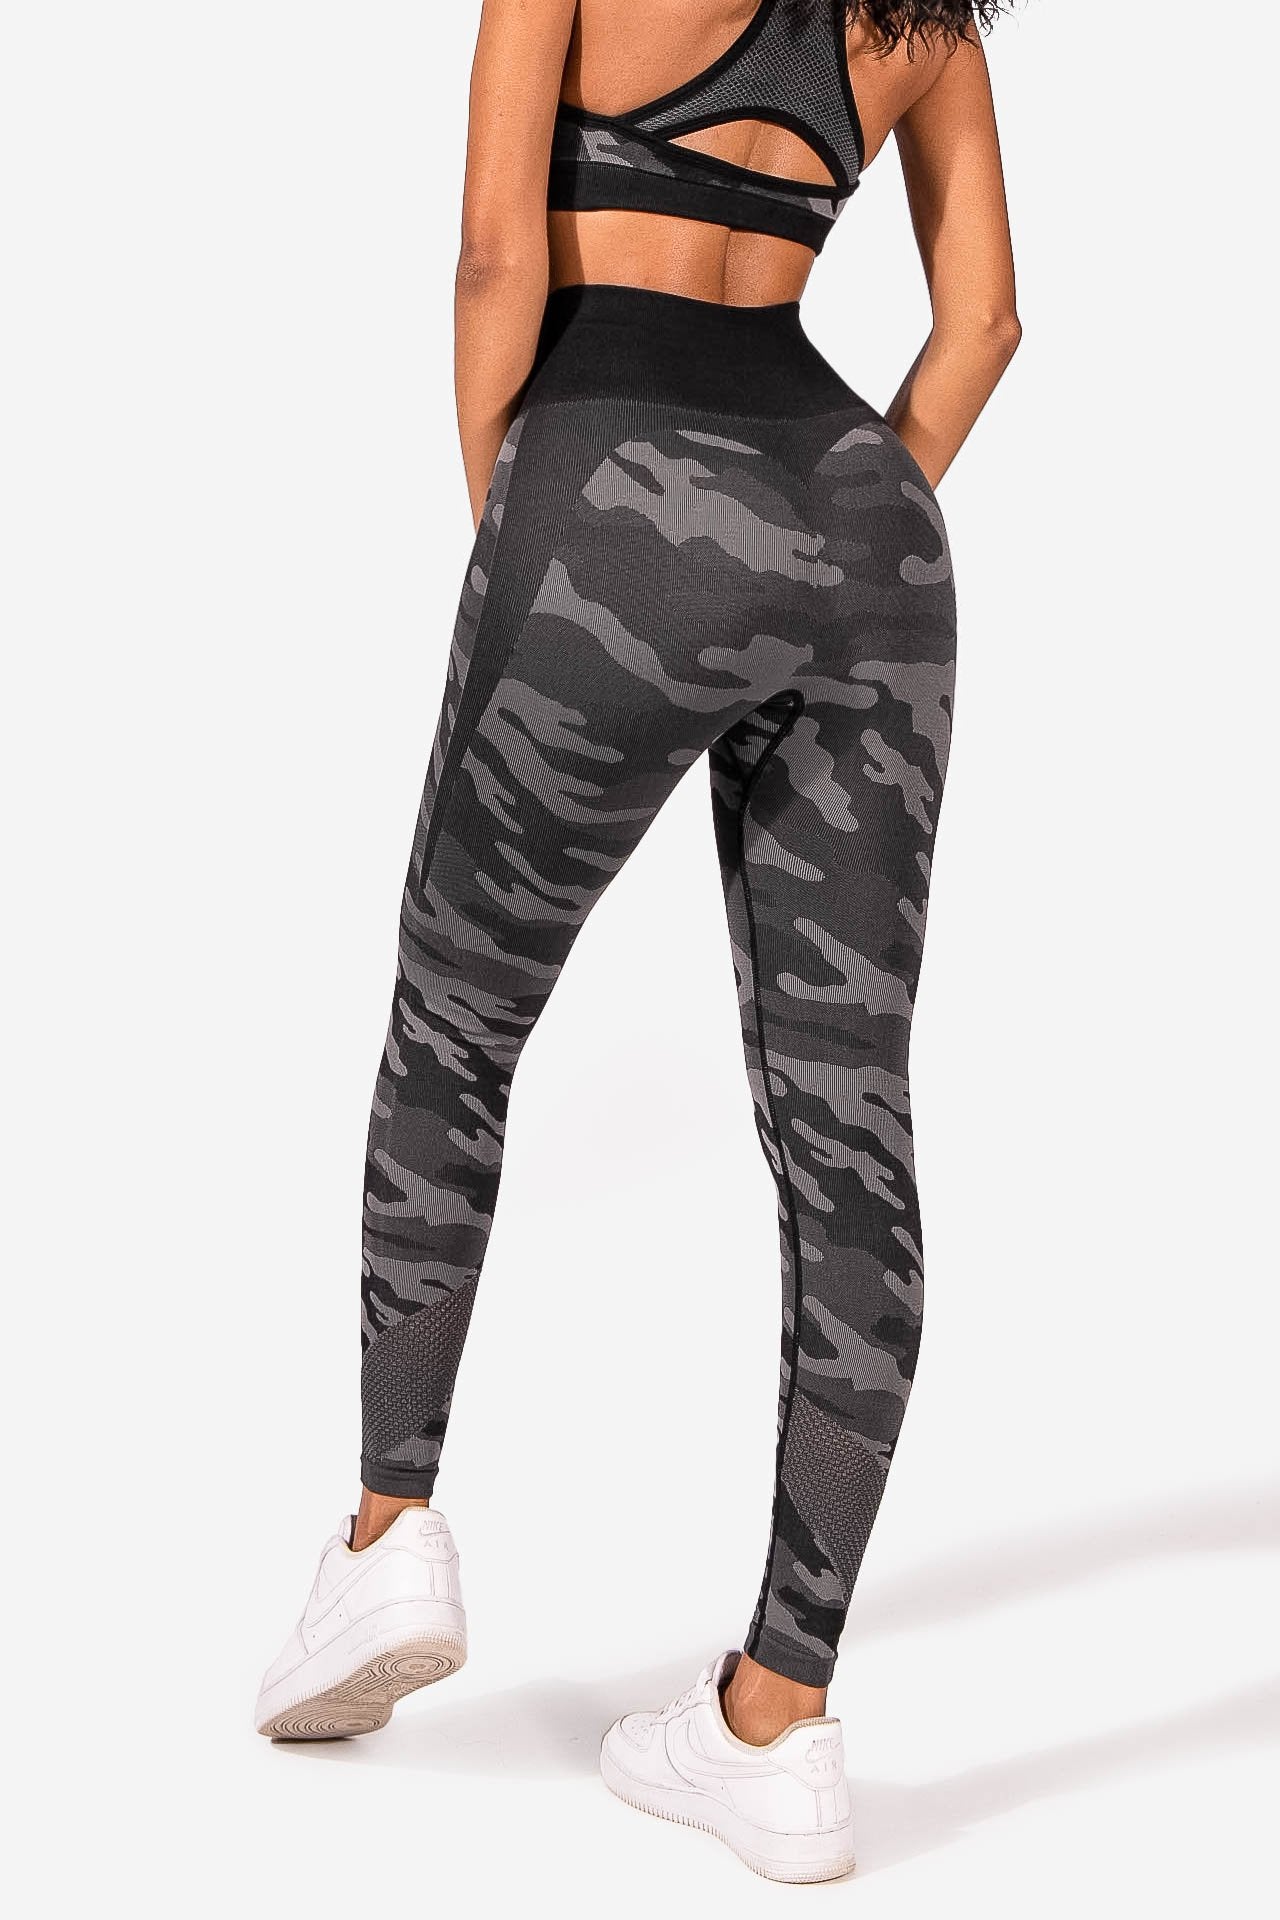 NEW Free People Movement Seamless Contour Yoga Legging in Black XS/S $98  |FF-074 